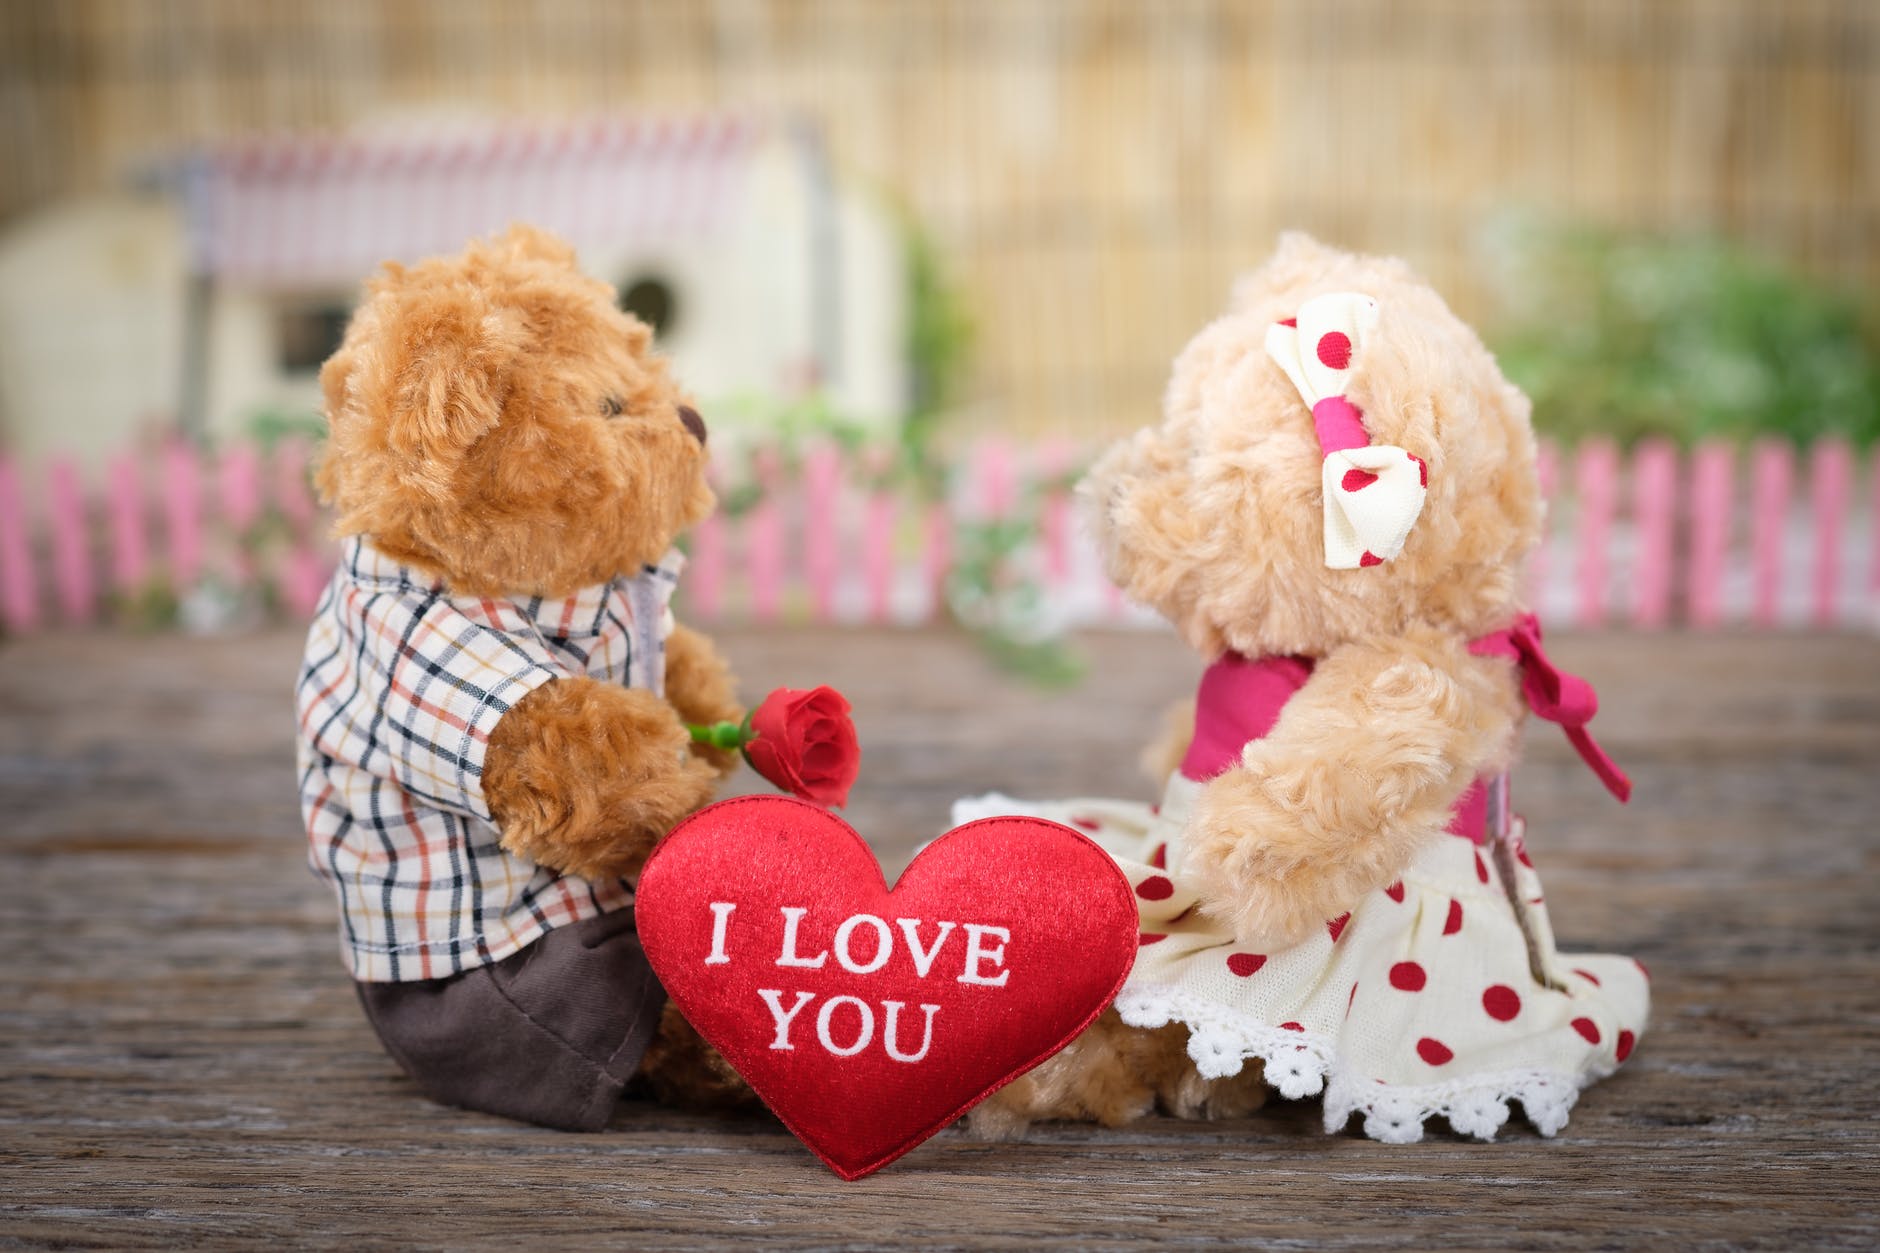 Two bears facing each other with an I love you heart shaped pillow.